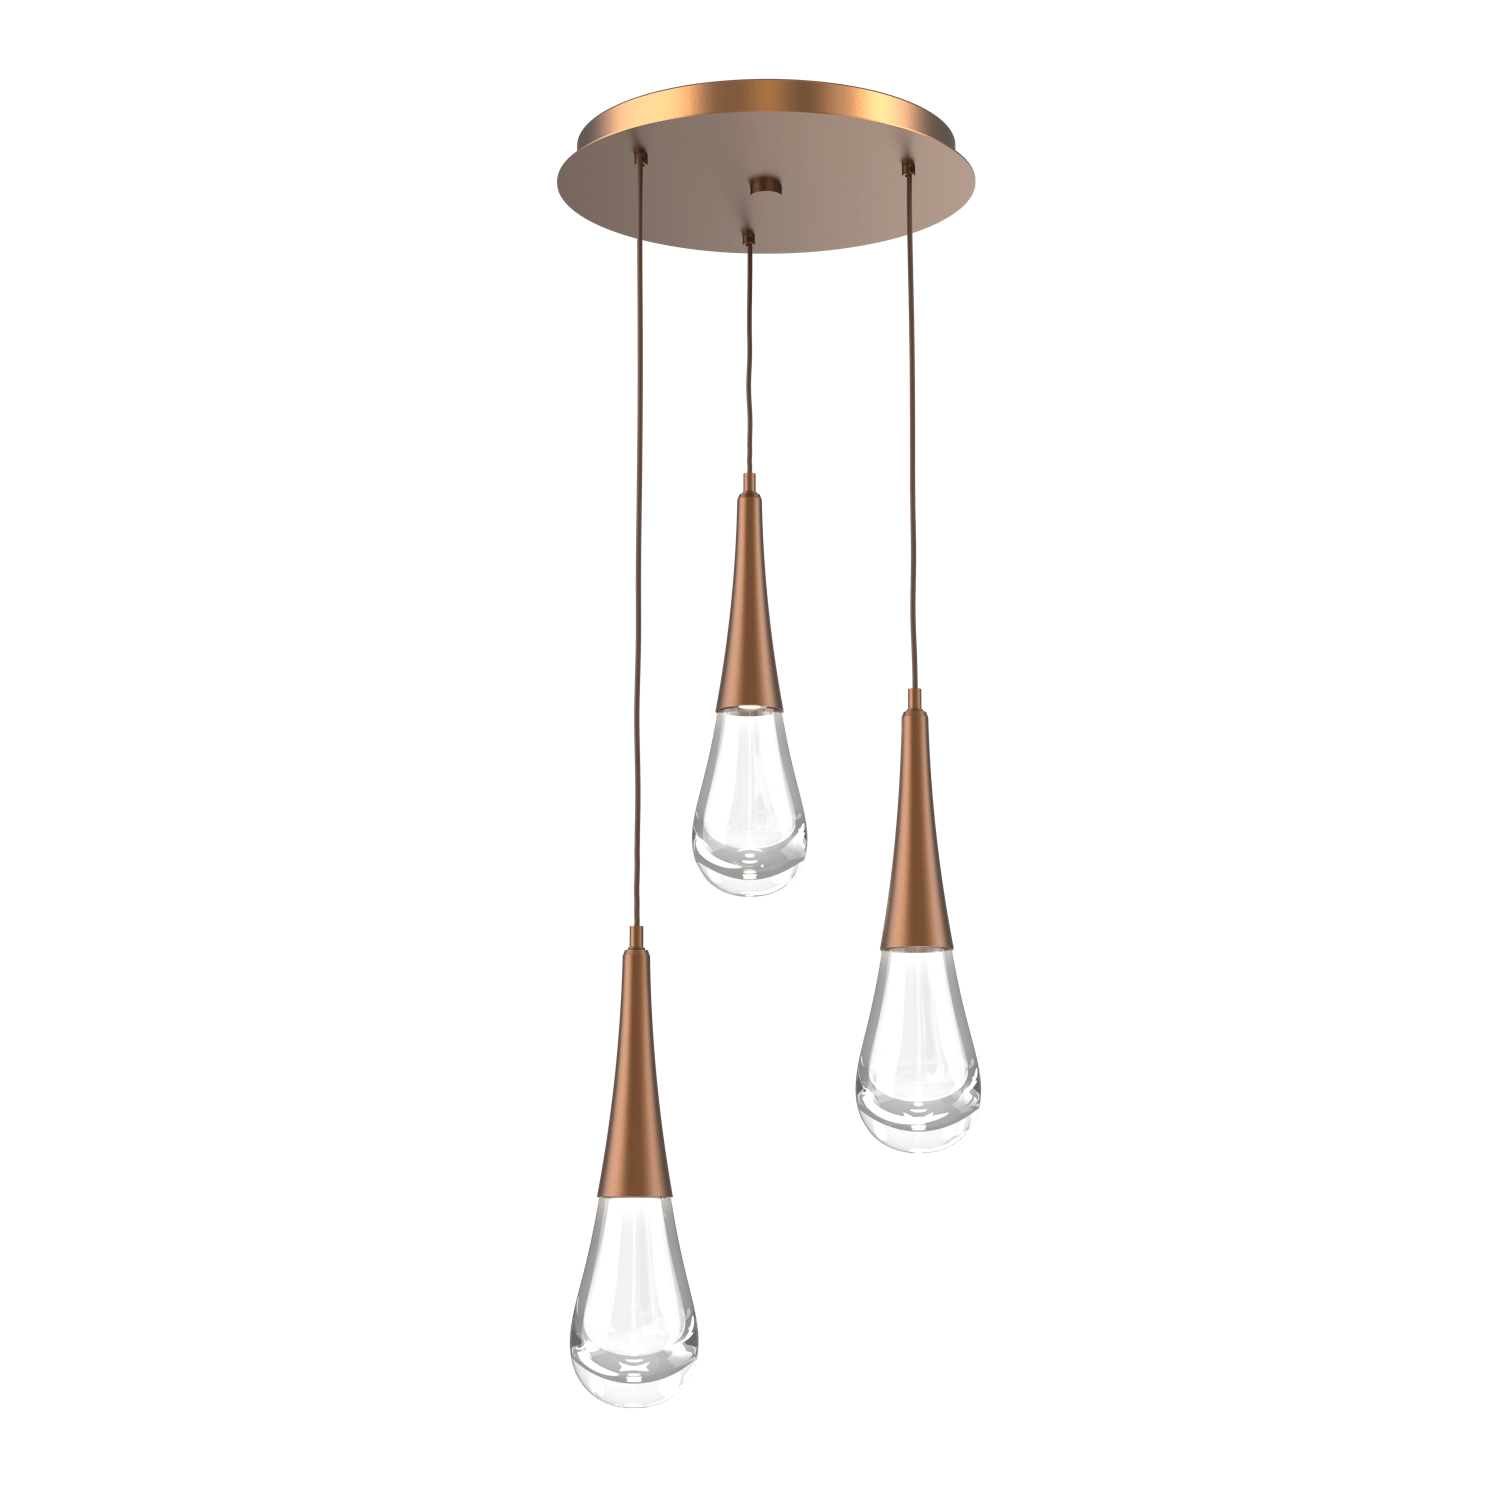 CHB0078-03-BB-Hammerton-Studio-Raindrop-3-light-round-pendant-chandelier-with-burnished-bronze-finish-and-clear-blown-glass-shades-and-LED-lamping